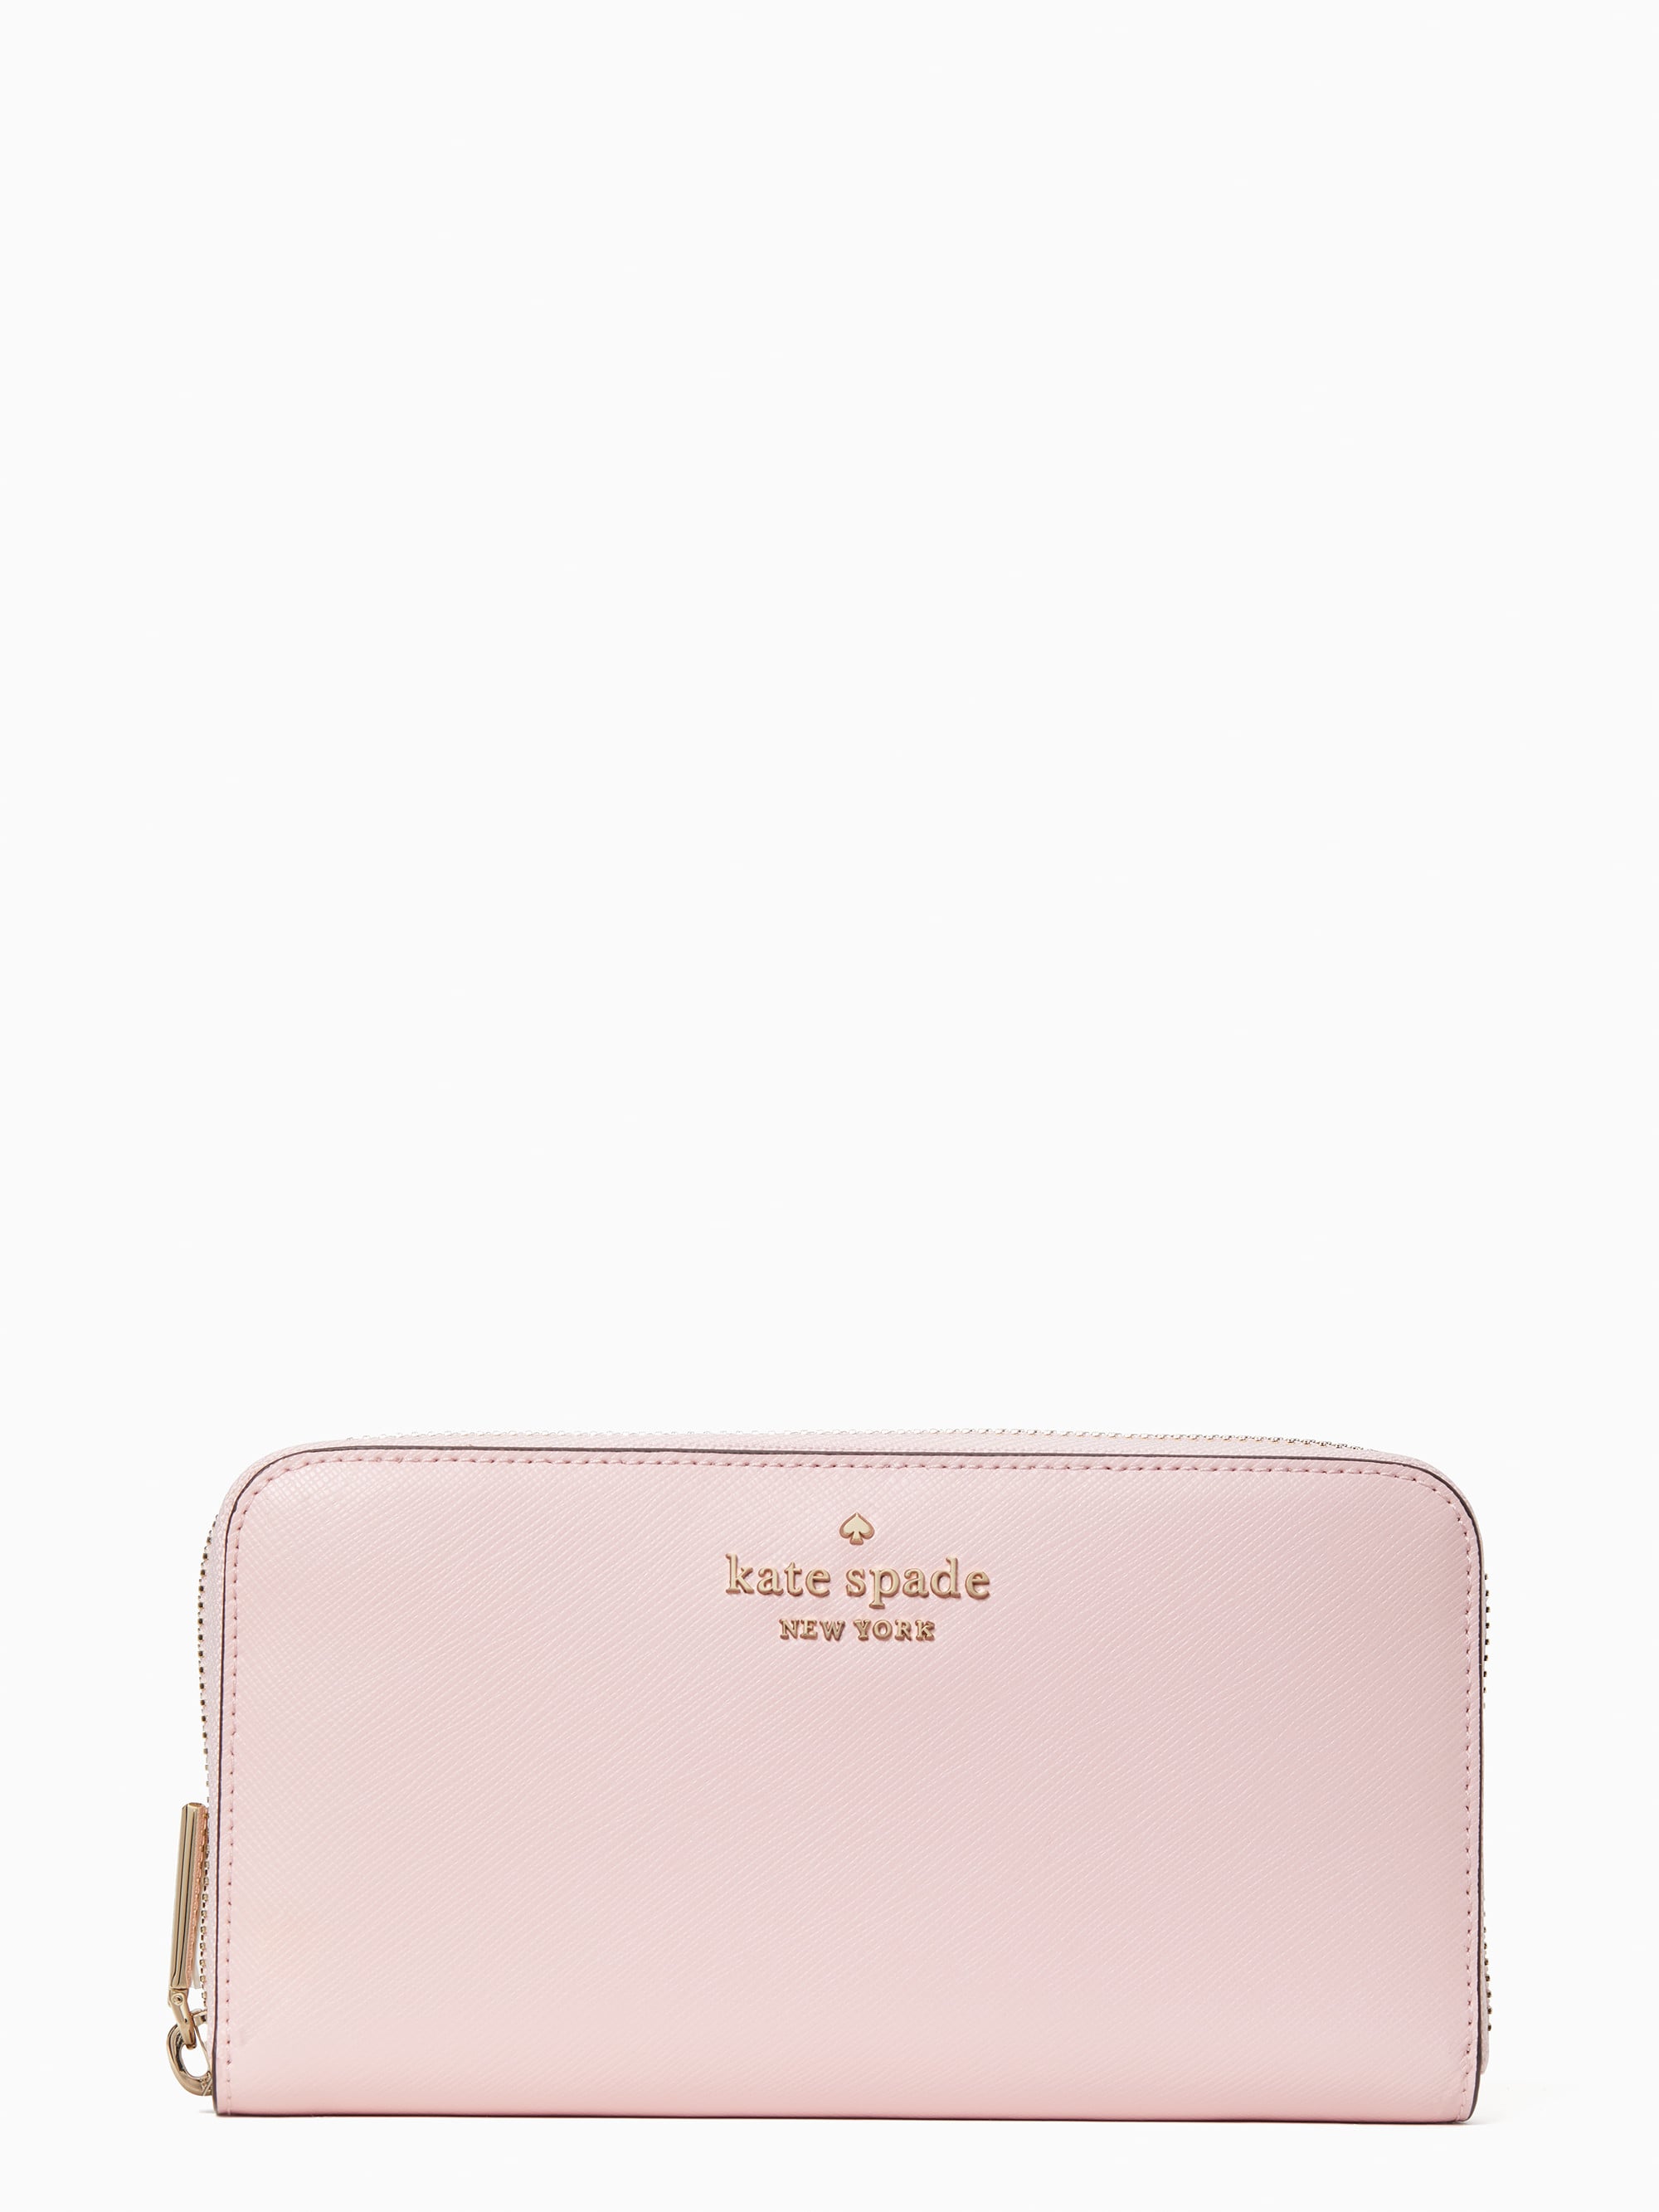 A Great Wallet: Kate Spade Staci Large Continental Wallet | Shhh! Kate Spade  Is Having a Secret Sale With Discounts You Have to See to Believe |  POPSUGAR Fashion Photo 5